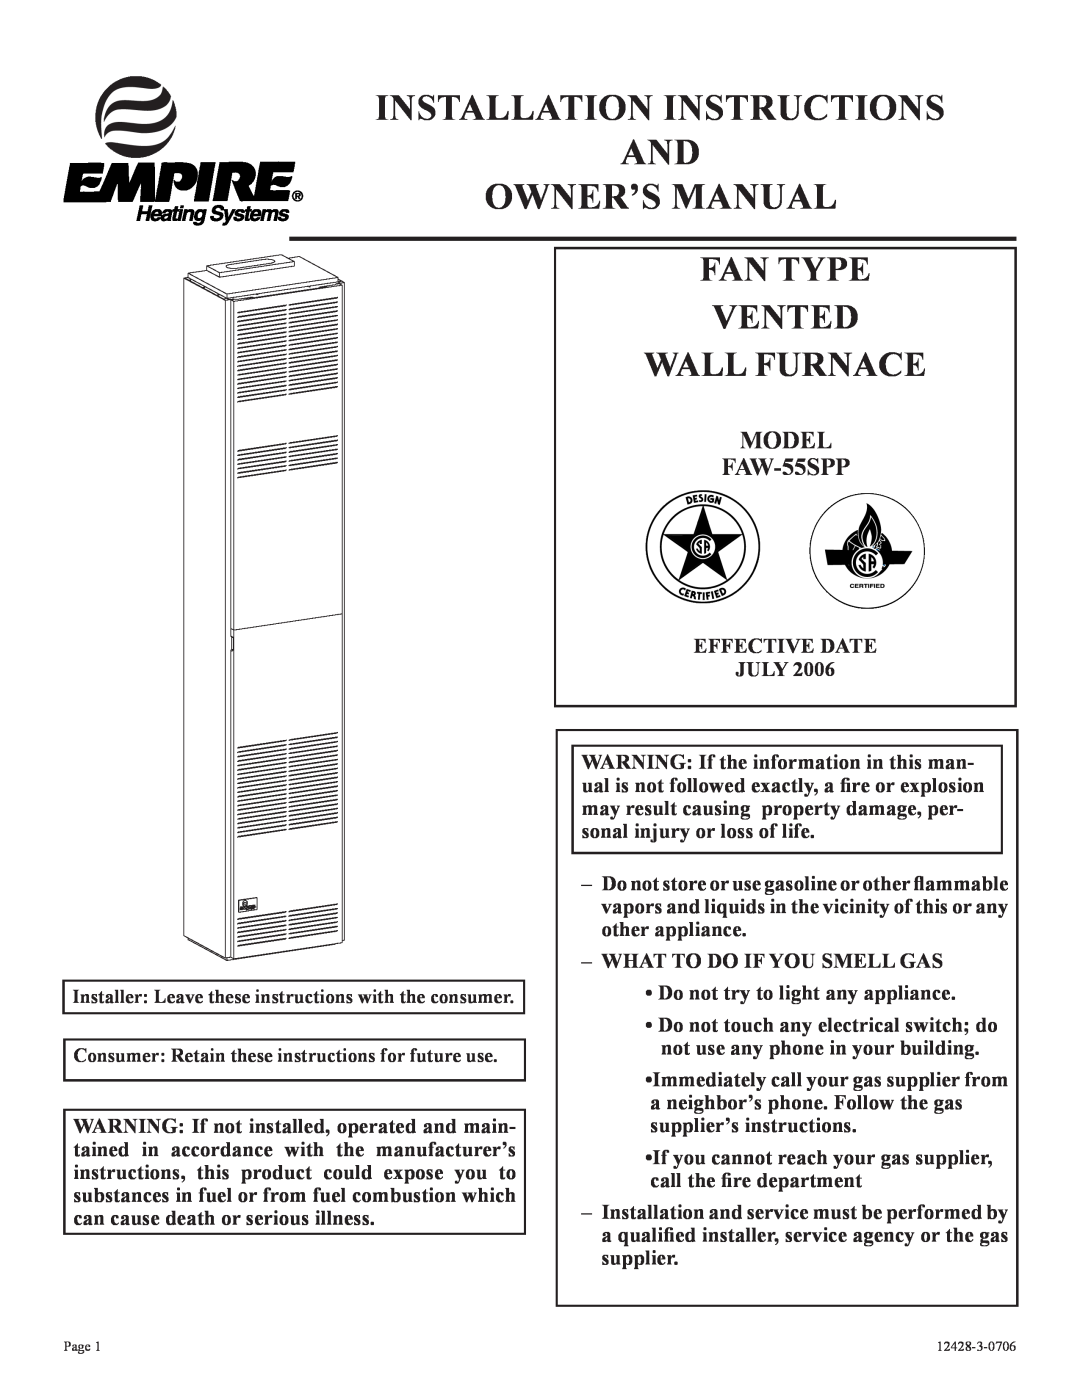 Empire Comfort Systems installation instructions MODEL FAW-55SPP, Fan Type Vented Wall Furnace 